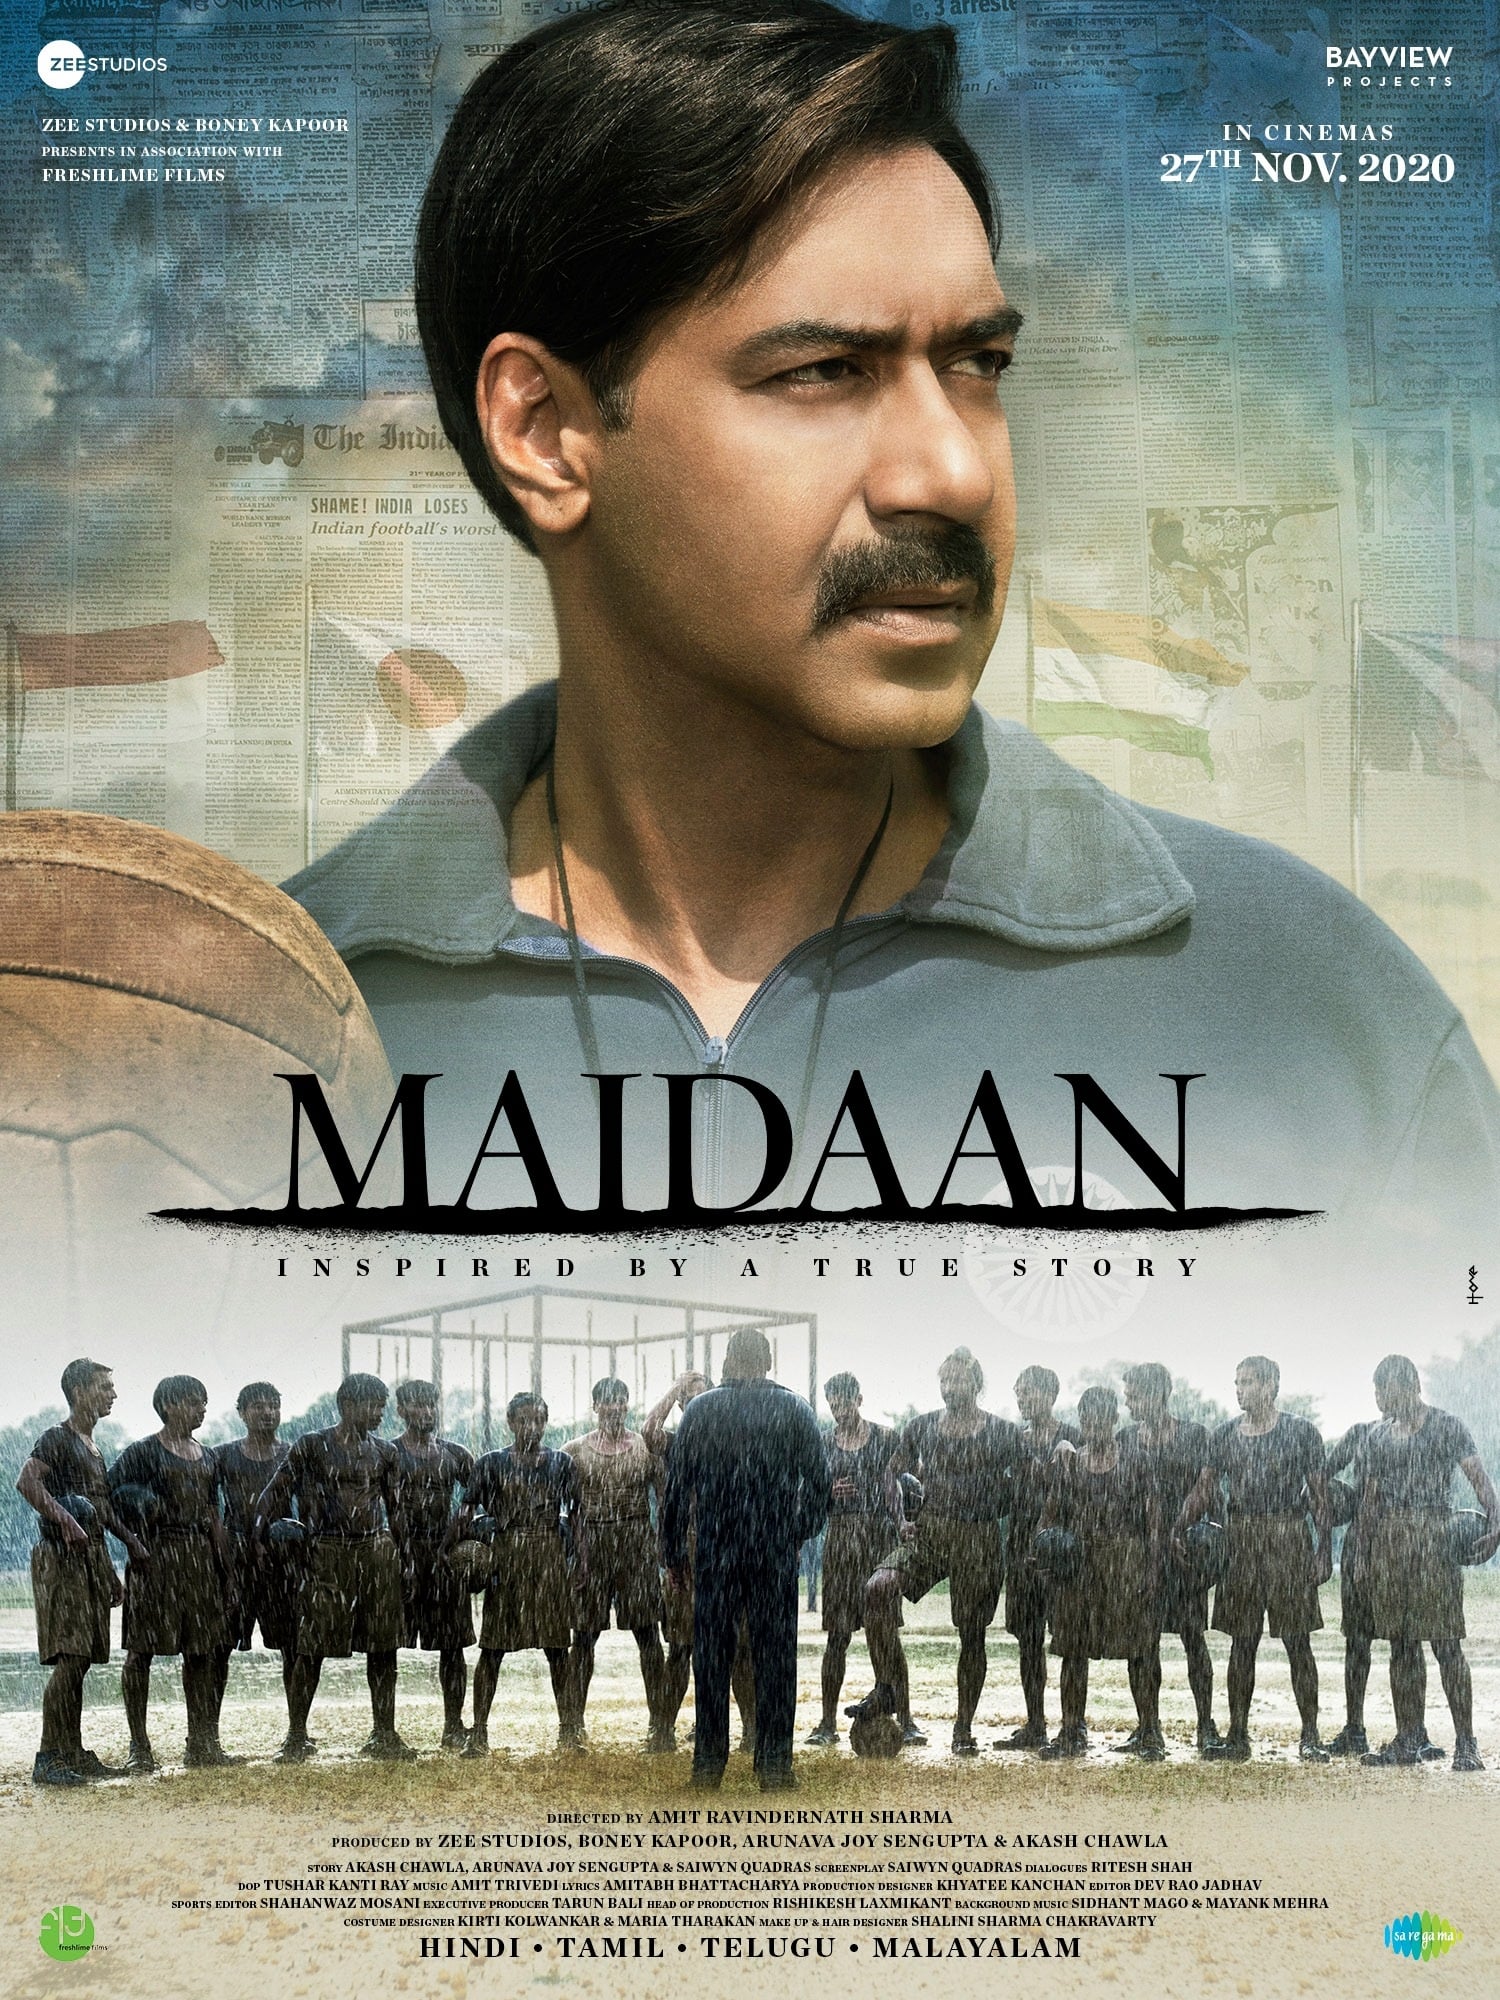 Poster for the movie "Maidaan"